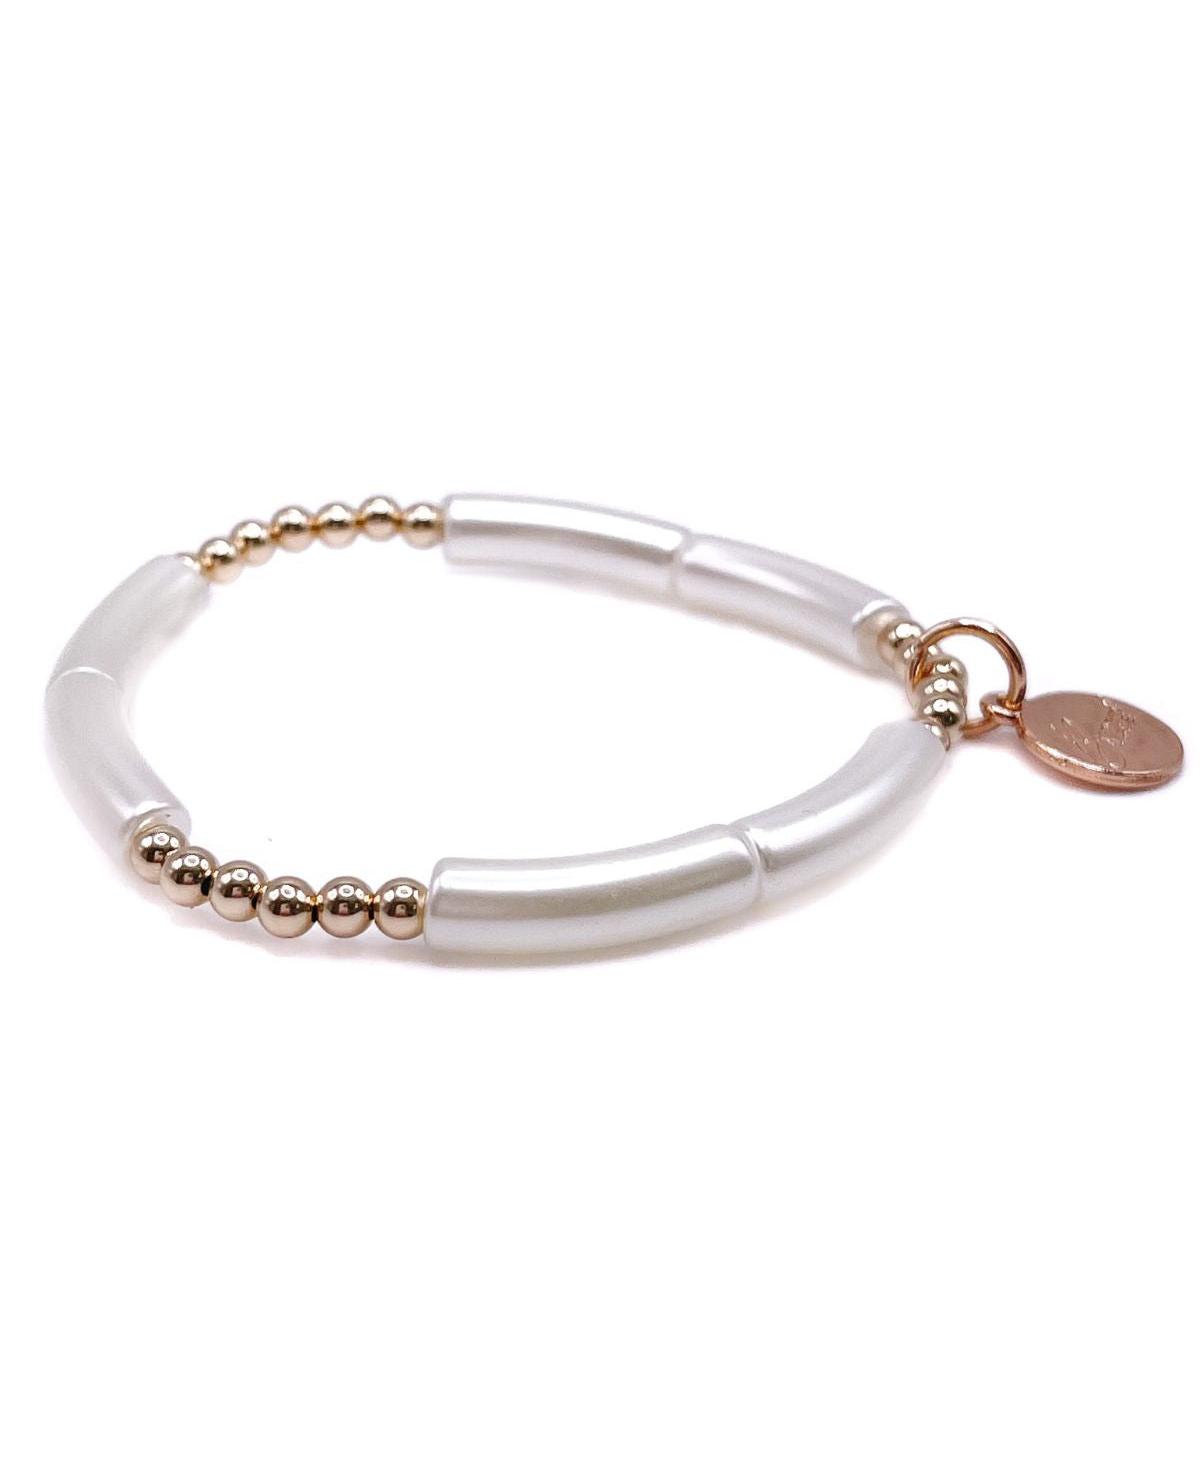 Non-Tarnishing Gold filled, 4mm Gold Ball and Acrylic Stretch Bracelet - Pearl